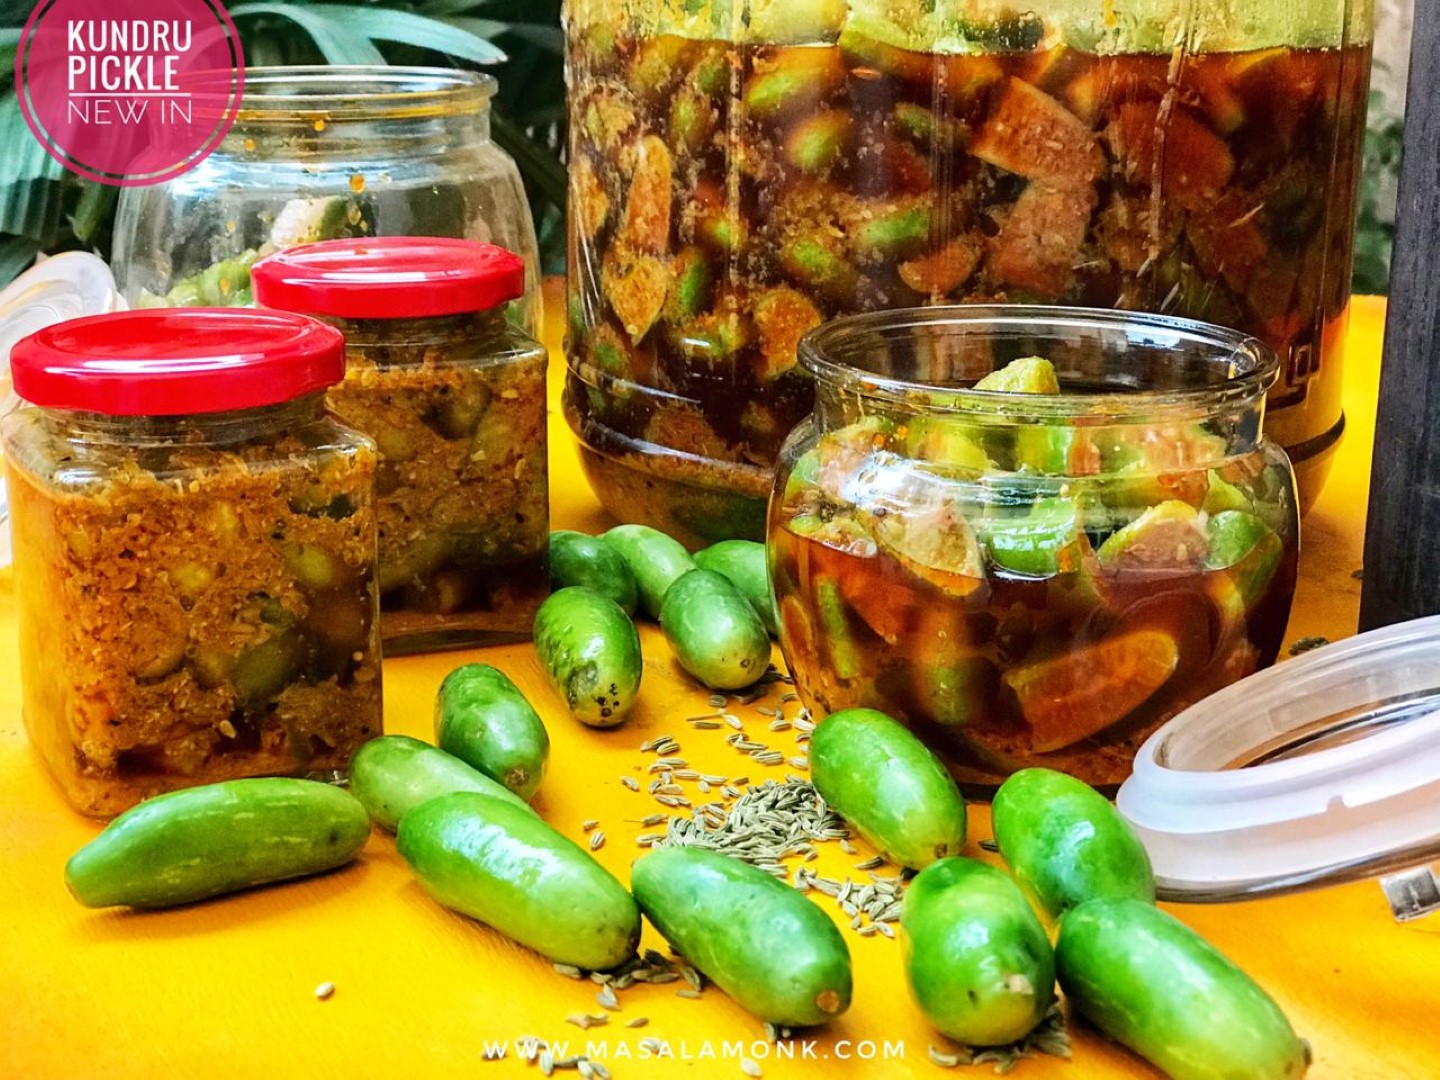 Made according to the popular and traditional Tendli pickle recipes